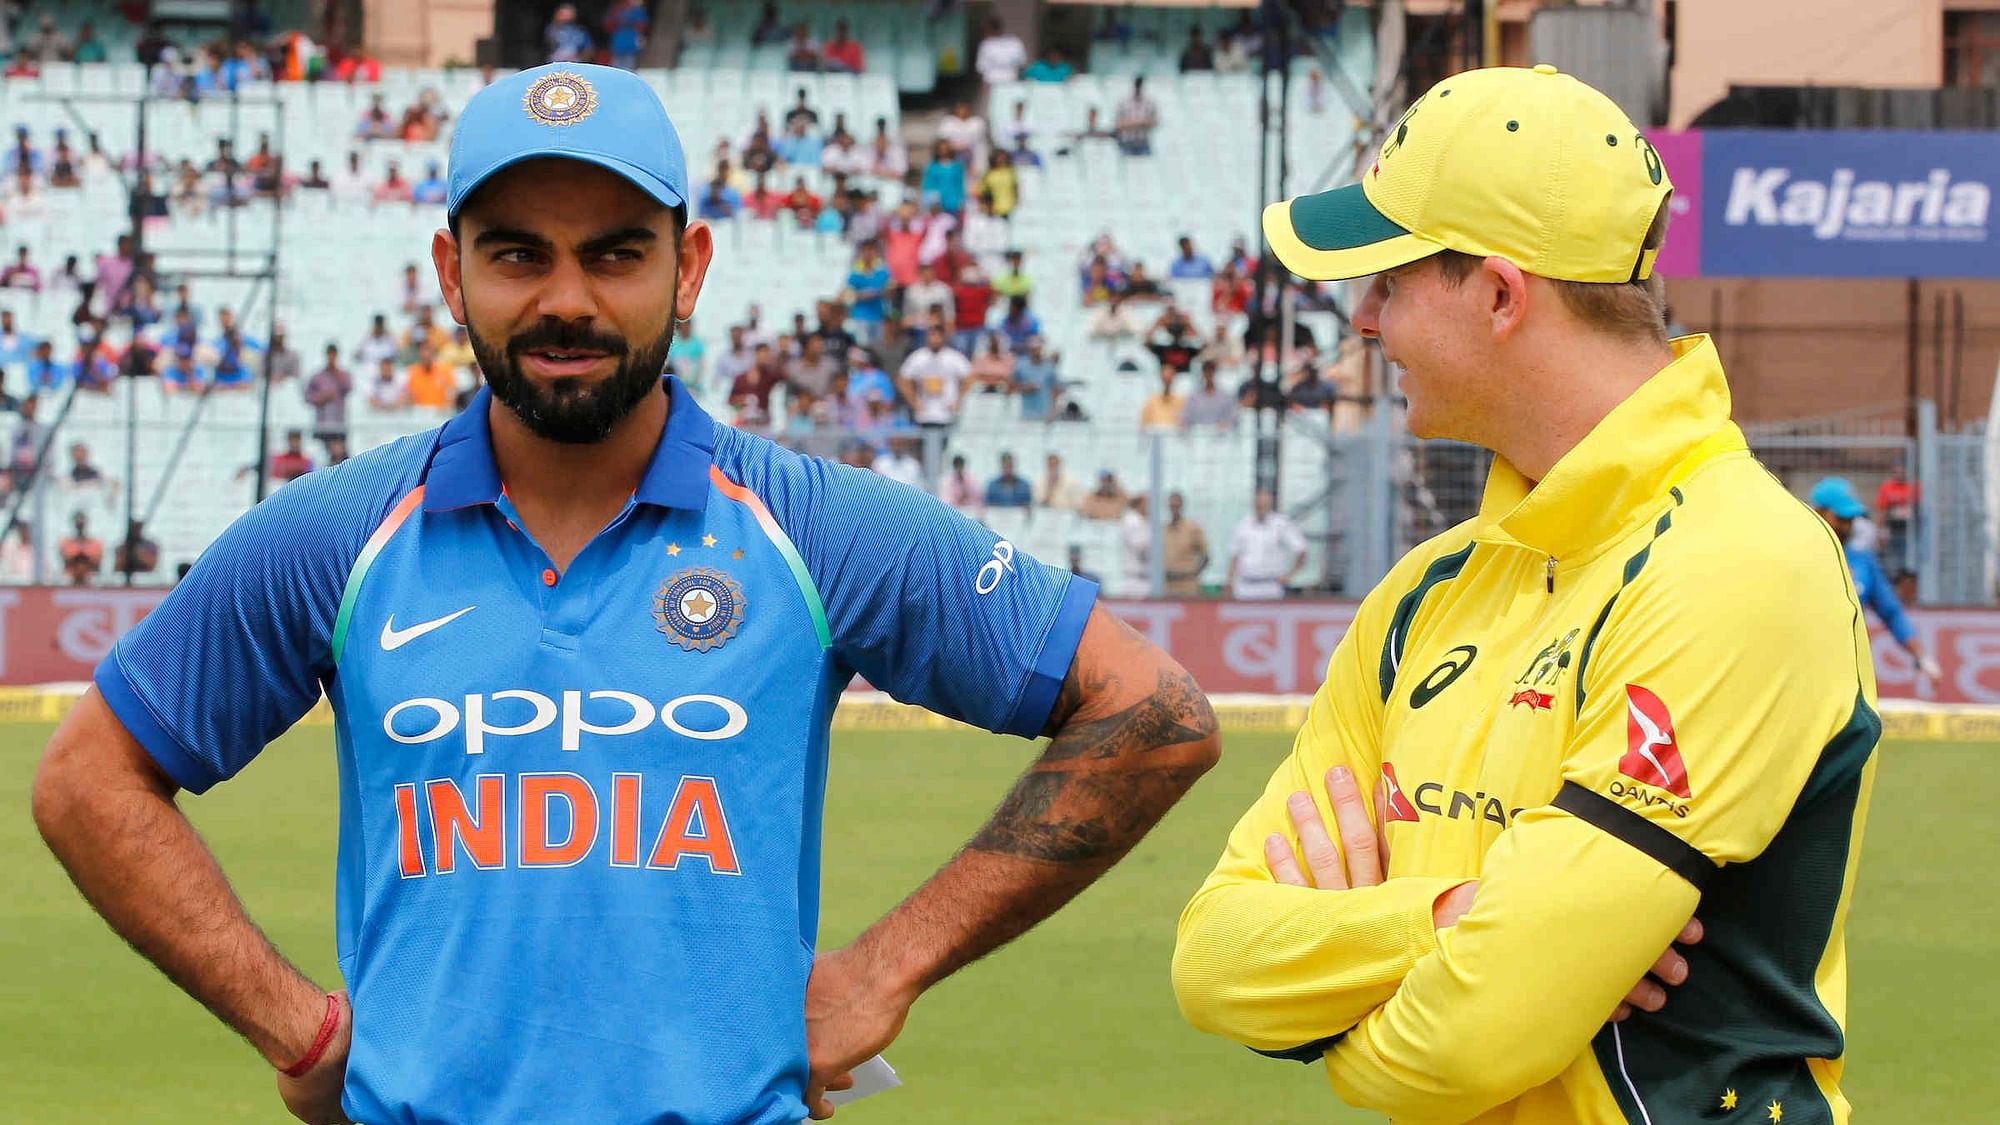 India’s tour of Australia later this year may be played in front of fans in the stadium.